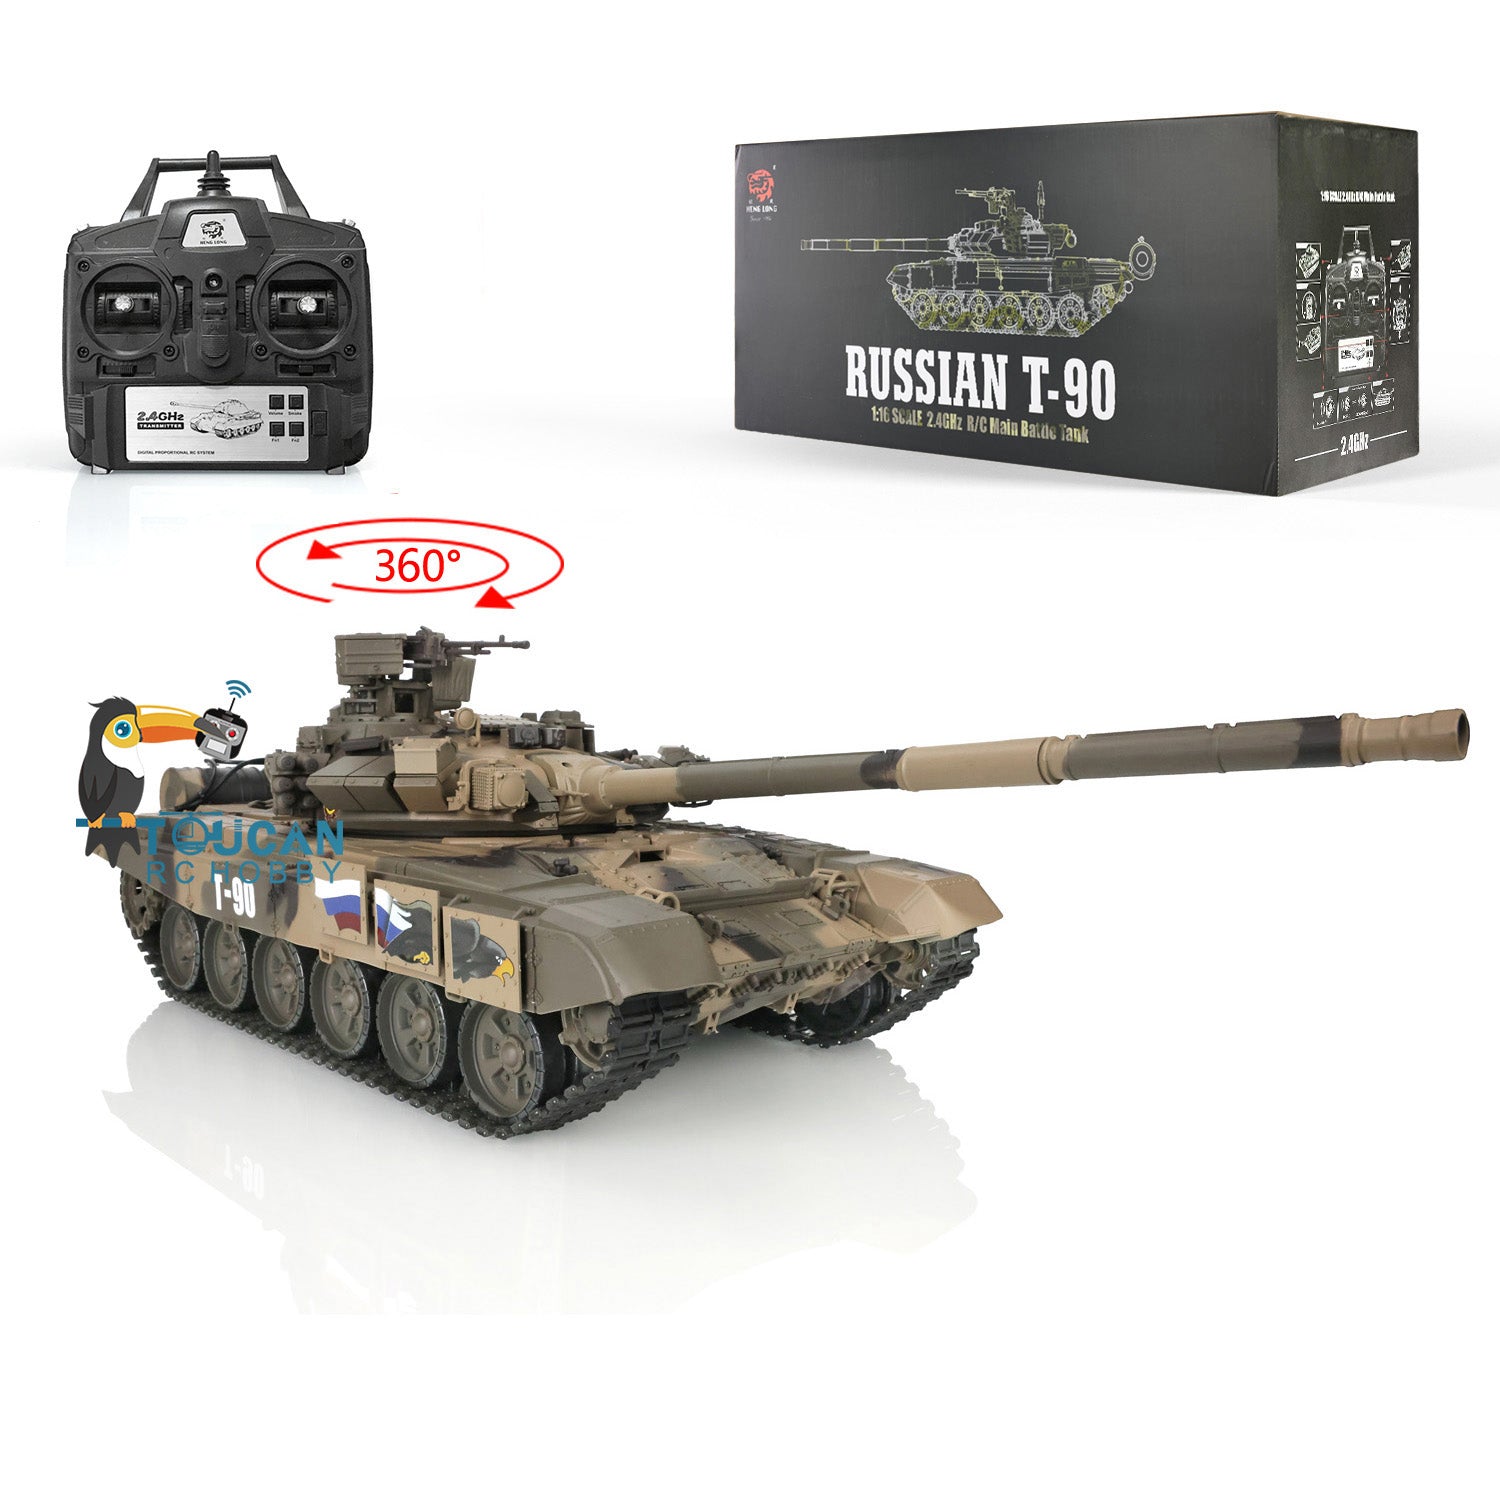 Henglong 1/16 7.0 Rc Tank Remote Control Tanks for Adult (3868 Professional  Version)